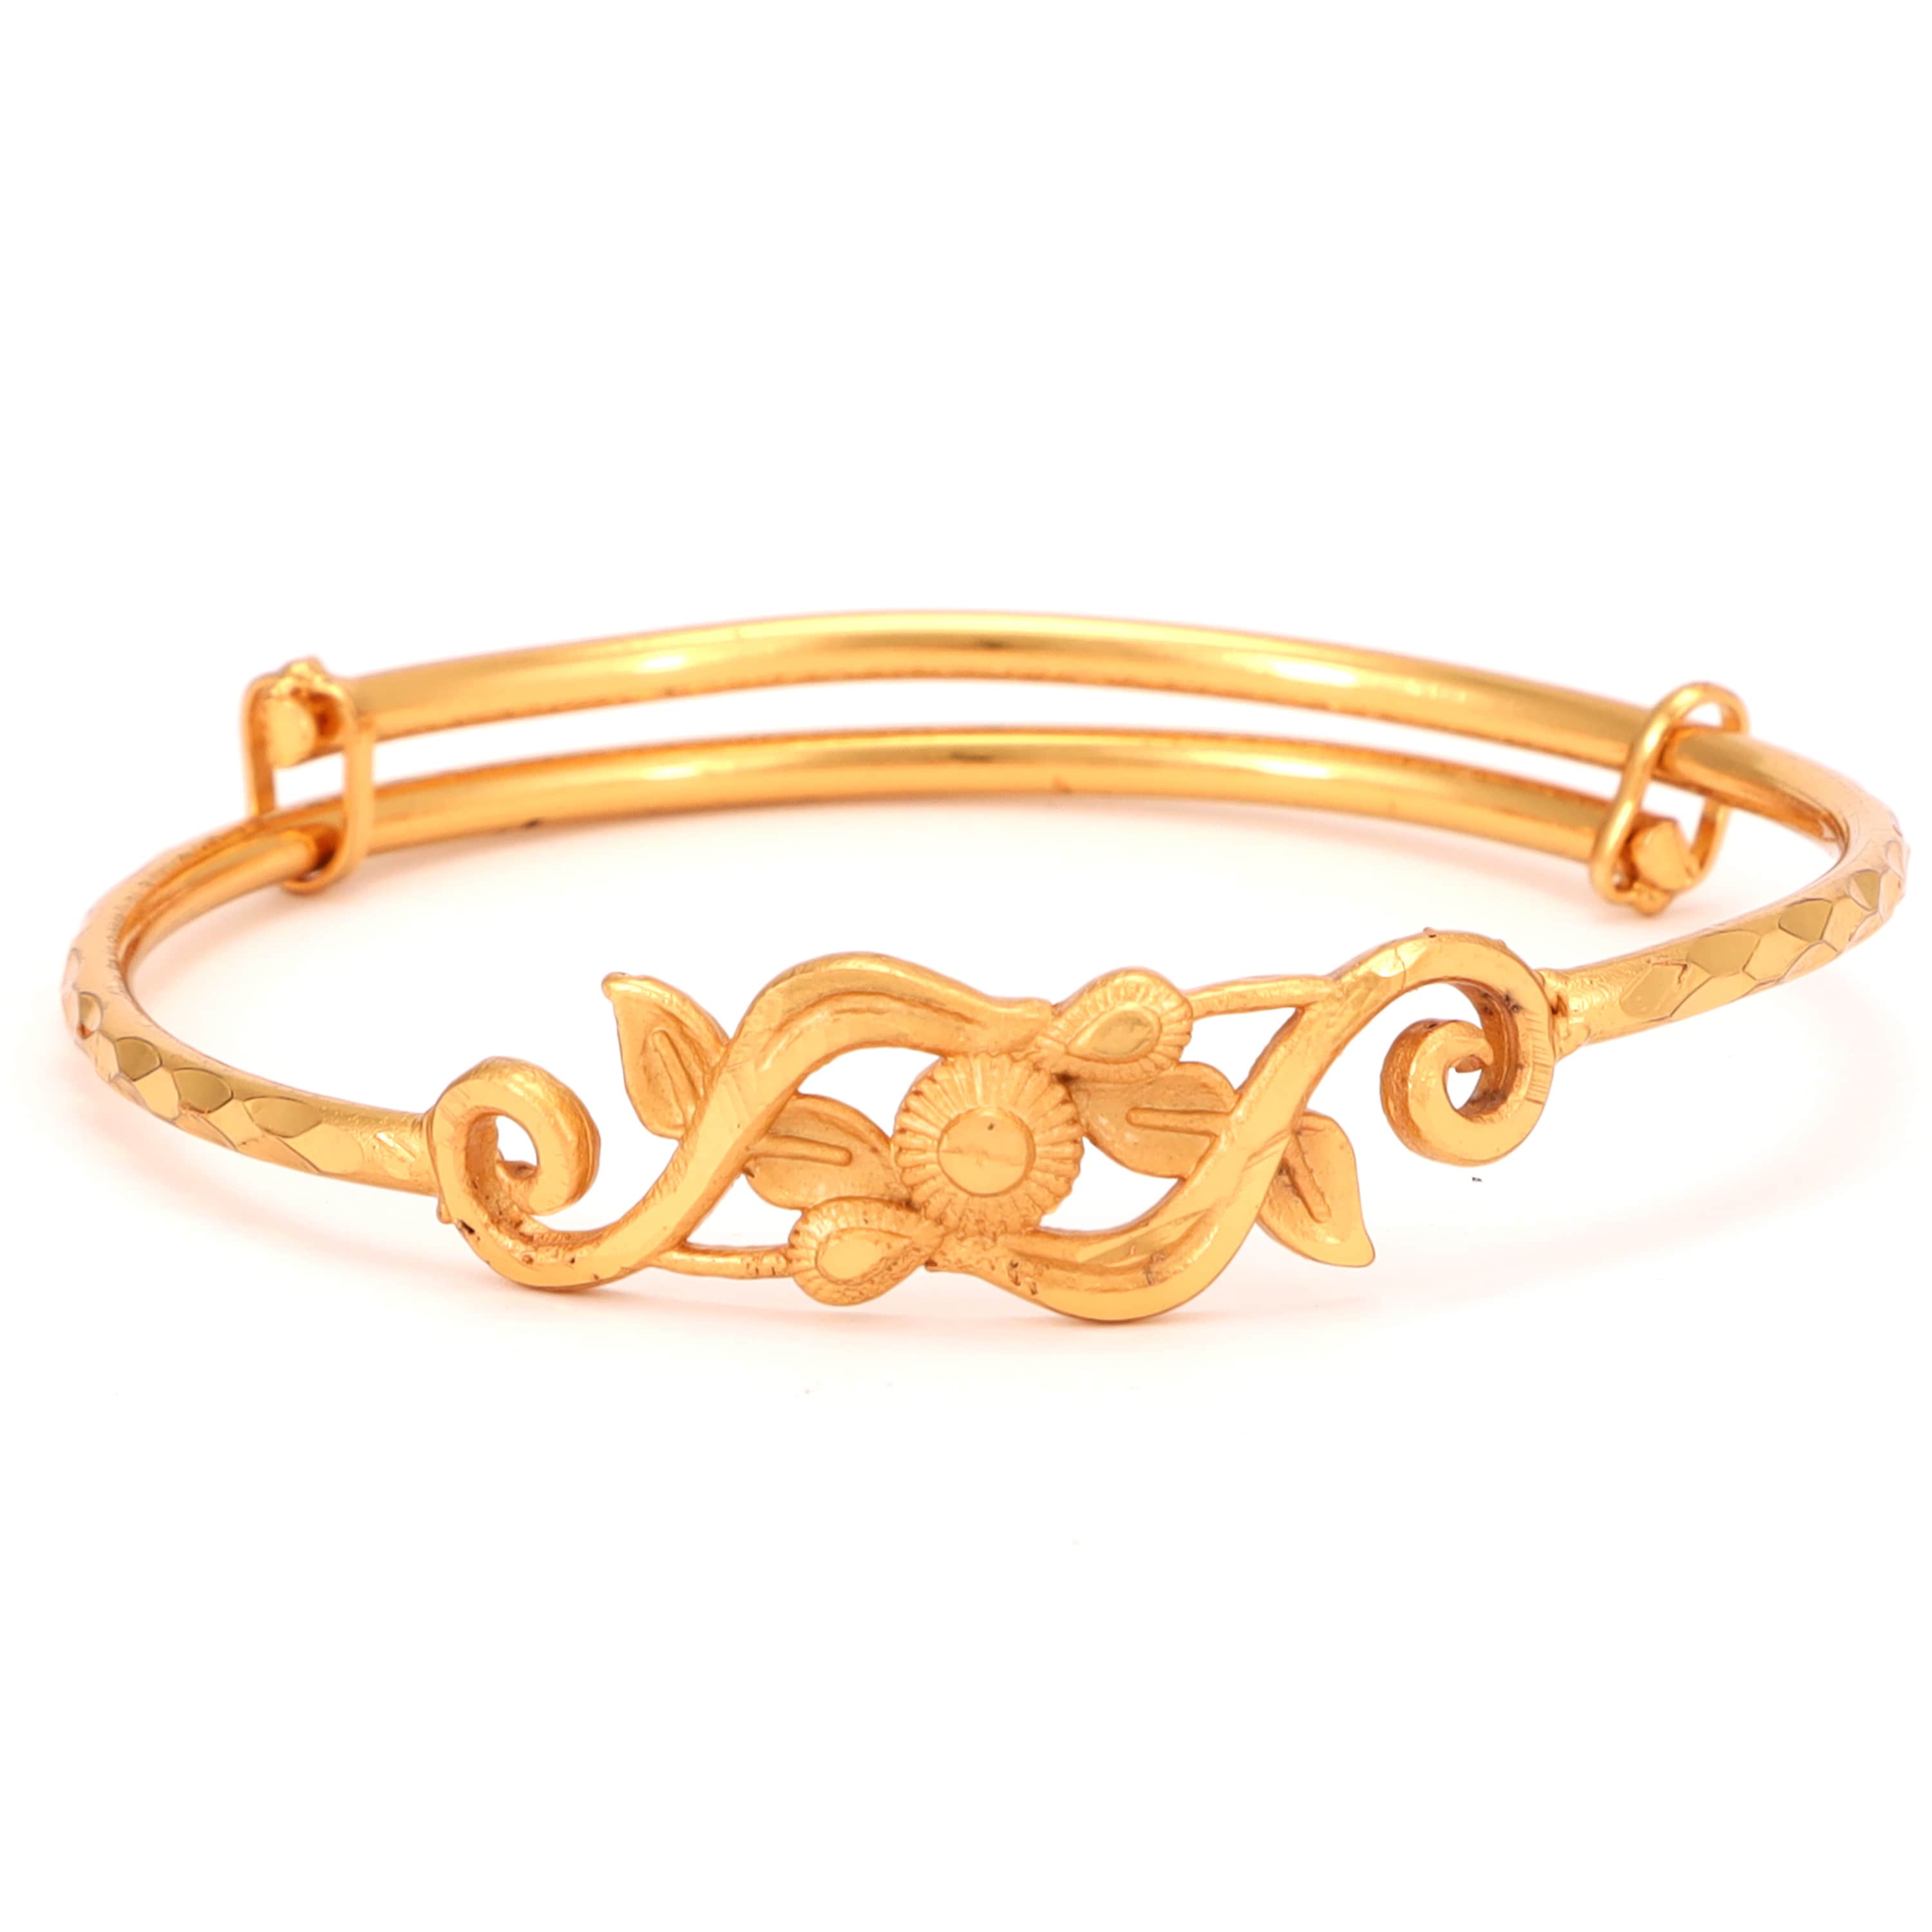 Rupashree Jewellers RB - Light weight regular wear Bracelet Noa design.  Weight 8grams approx per piece. Beautiful and sleek design. An exclusive  design from the SWARNALITE COLLECTION range of RupashreeJewellers RB. Visit